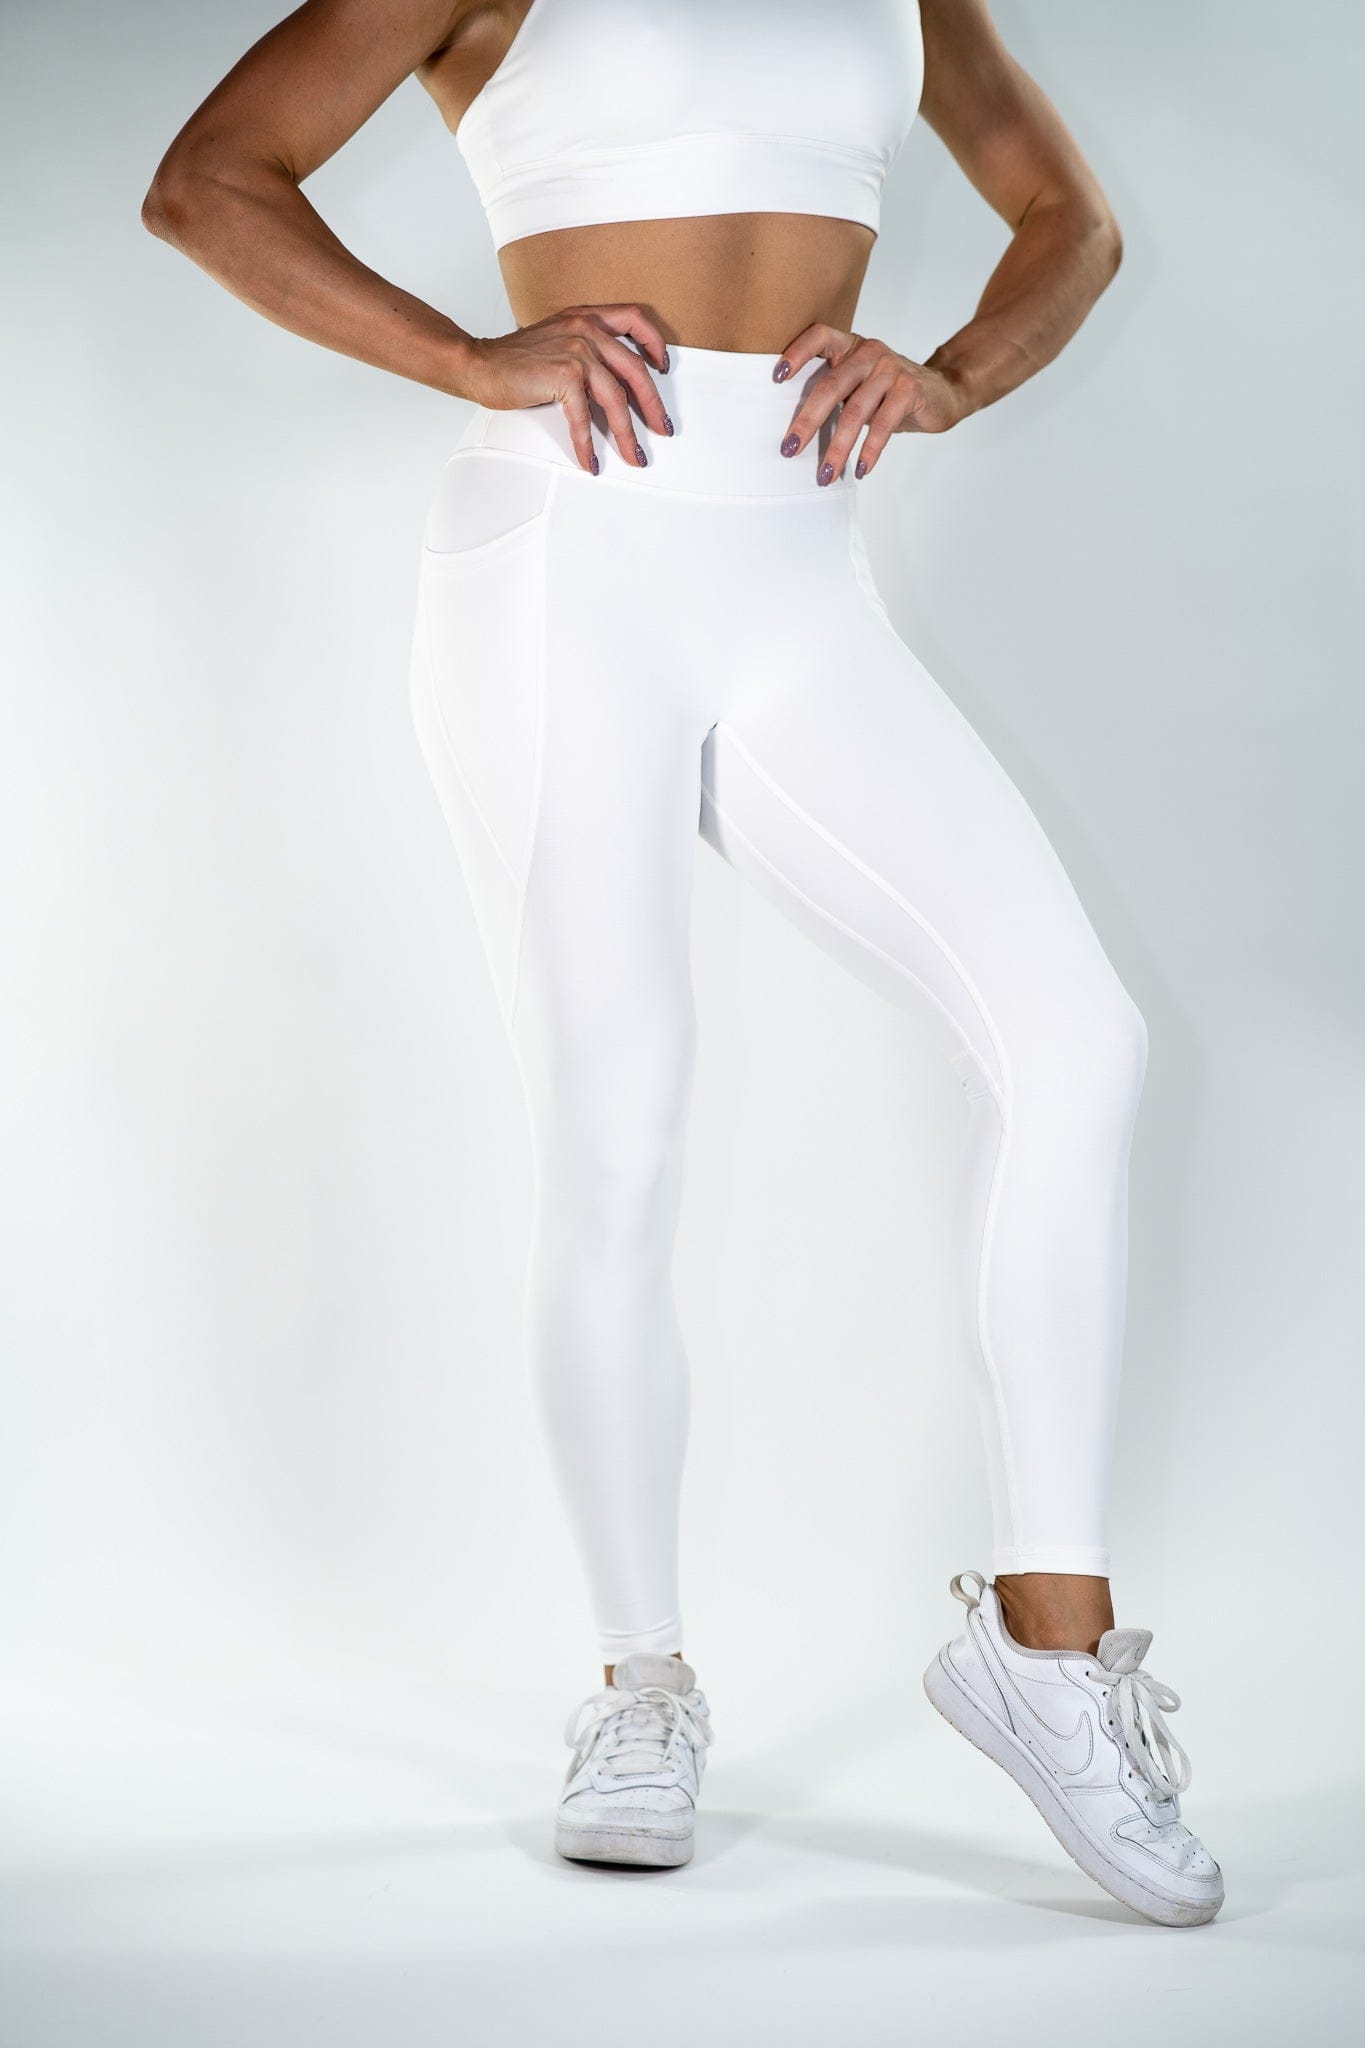 Kcutteyg Yoga Pants for Women with Pockets High Waisted Leggings Workout  Sports Running Athletic Pants (White, Medium) - Yahoo Shopping